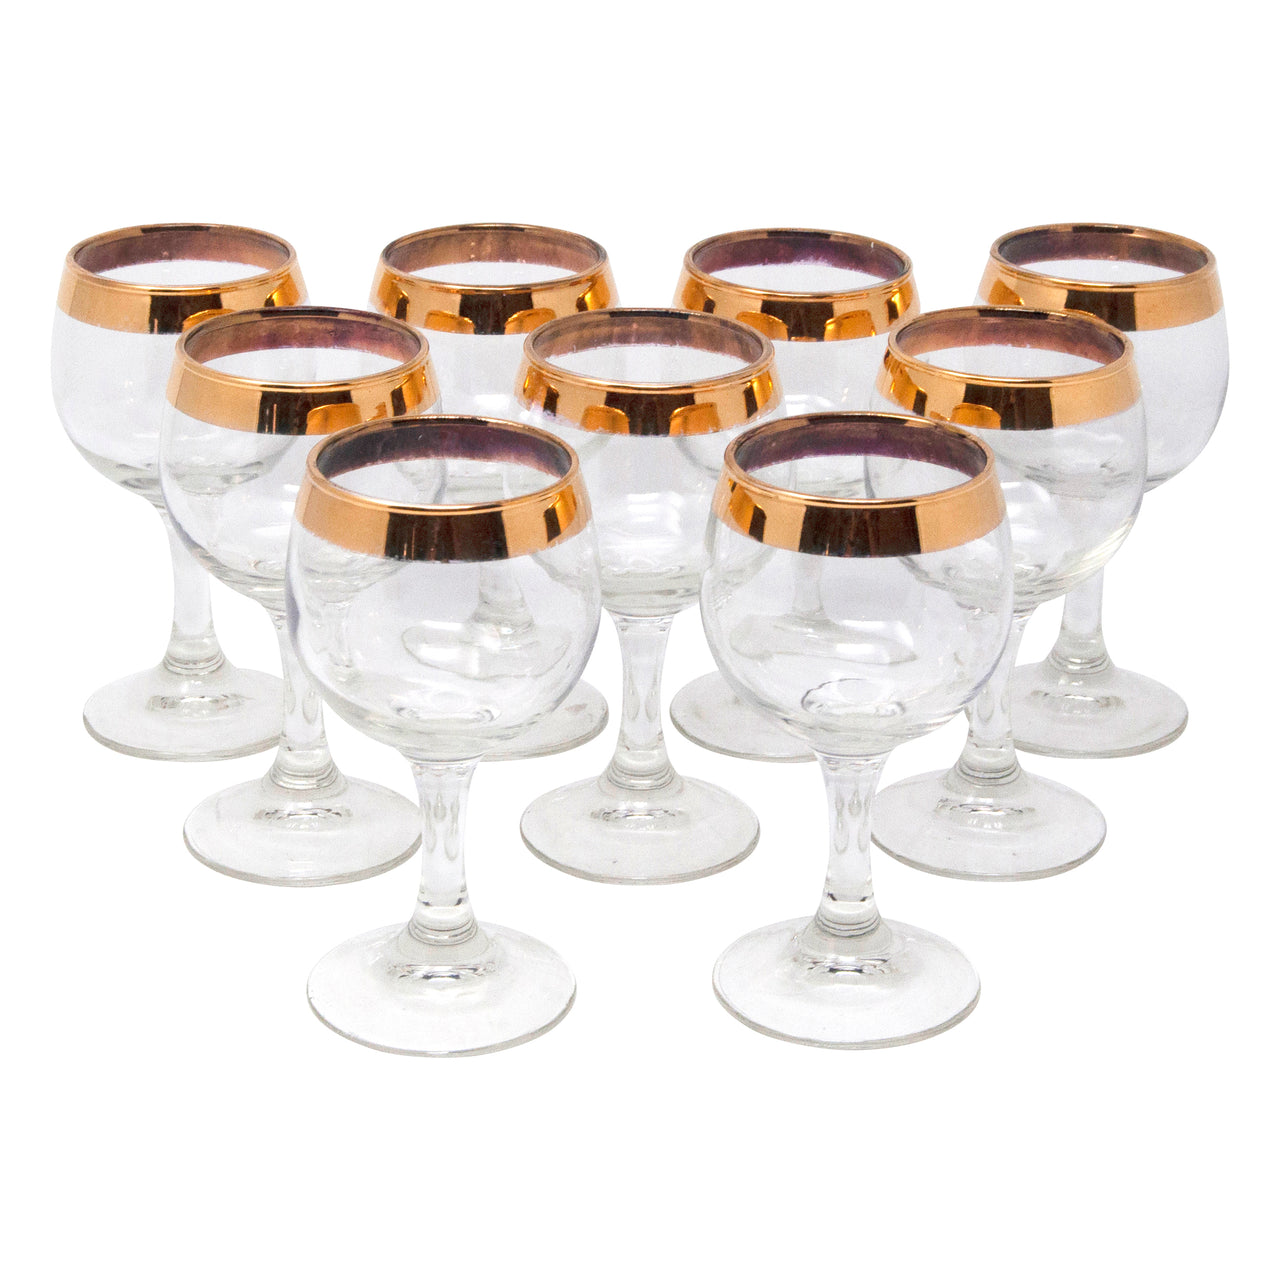 https://thehourshop.com/cdn/shop/products/12804-Vintage-Gold-Band-Small-Wine-Stems_1280x1280.jpg?v=1614379271